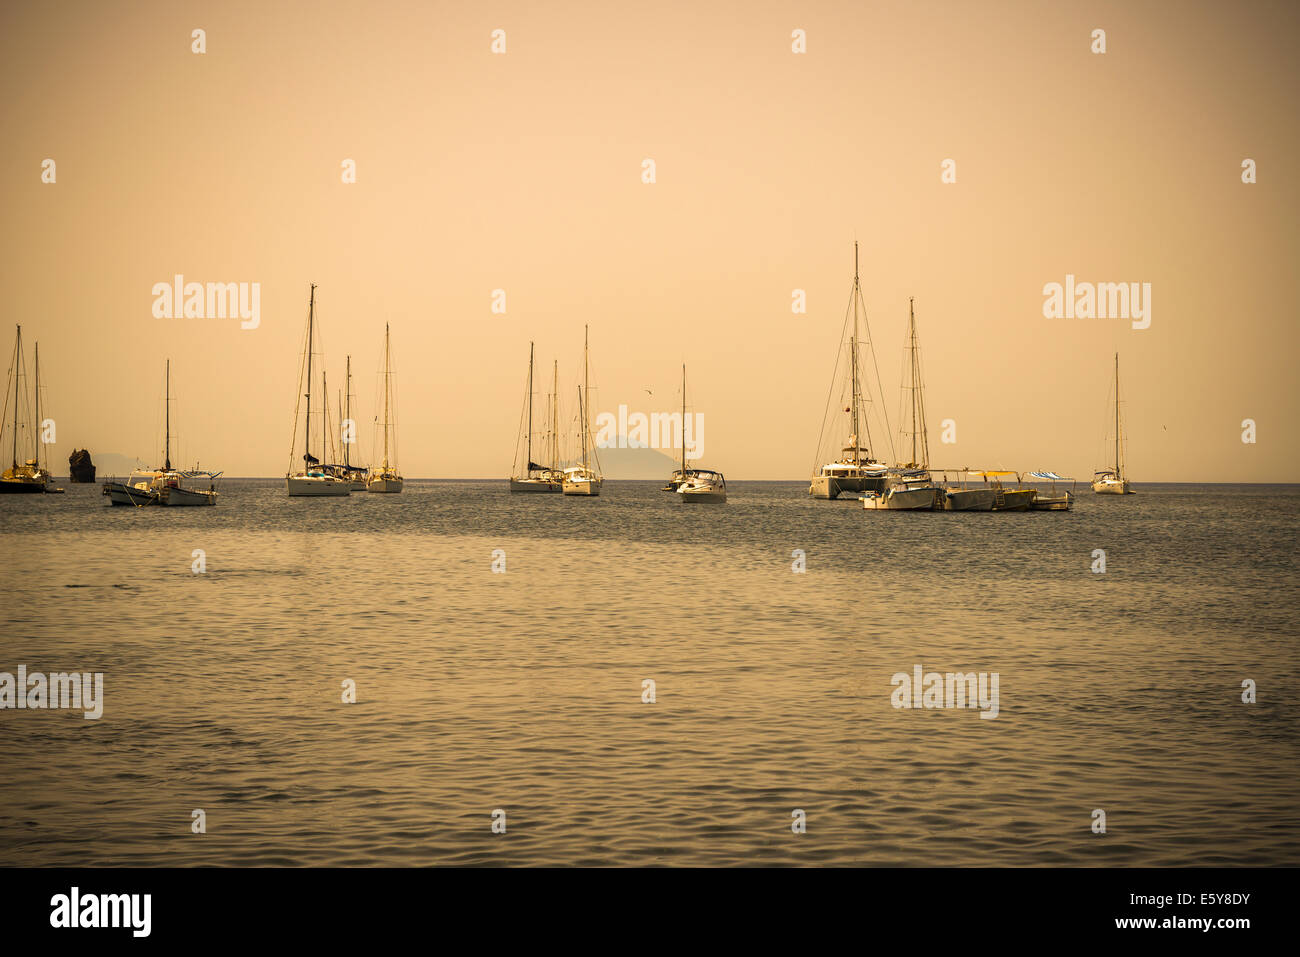 Aeolian sea landscape with yachts in sepia colors Stock Photo